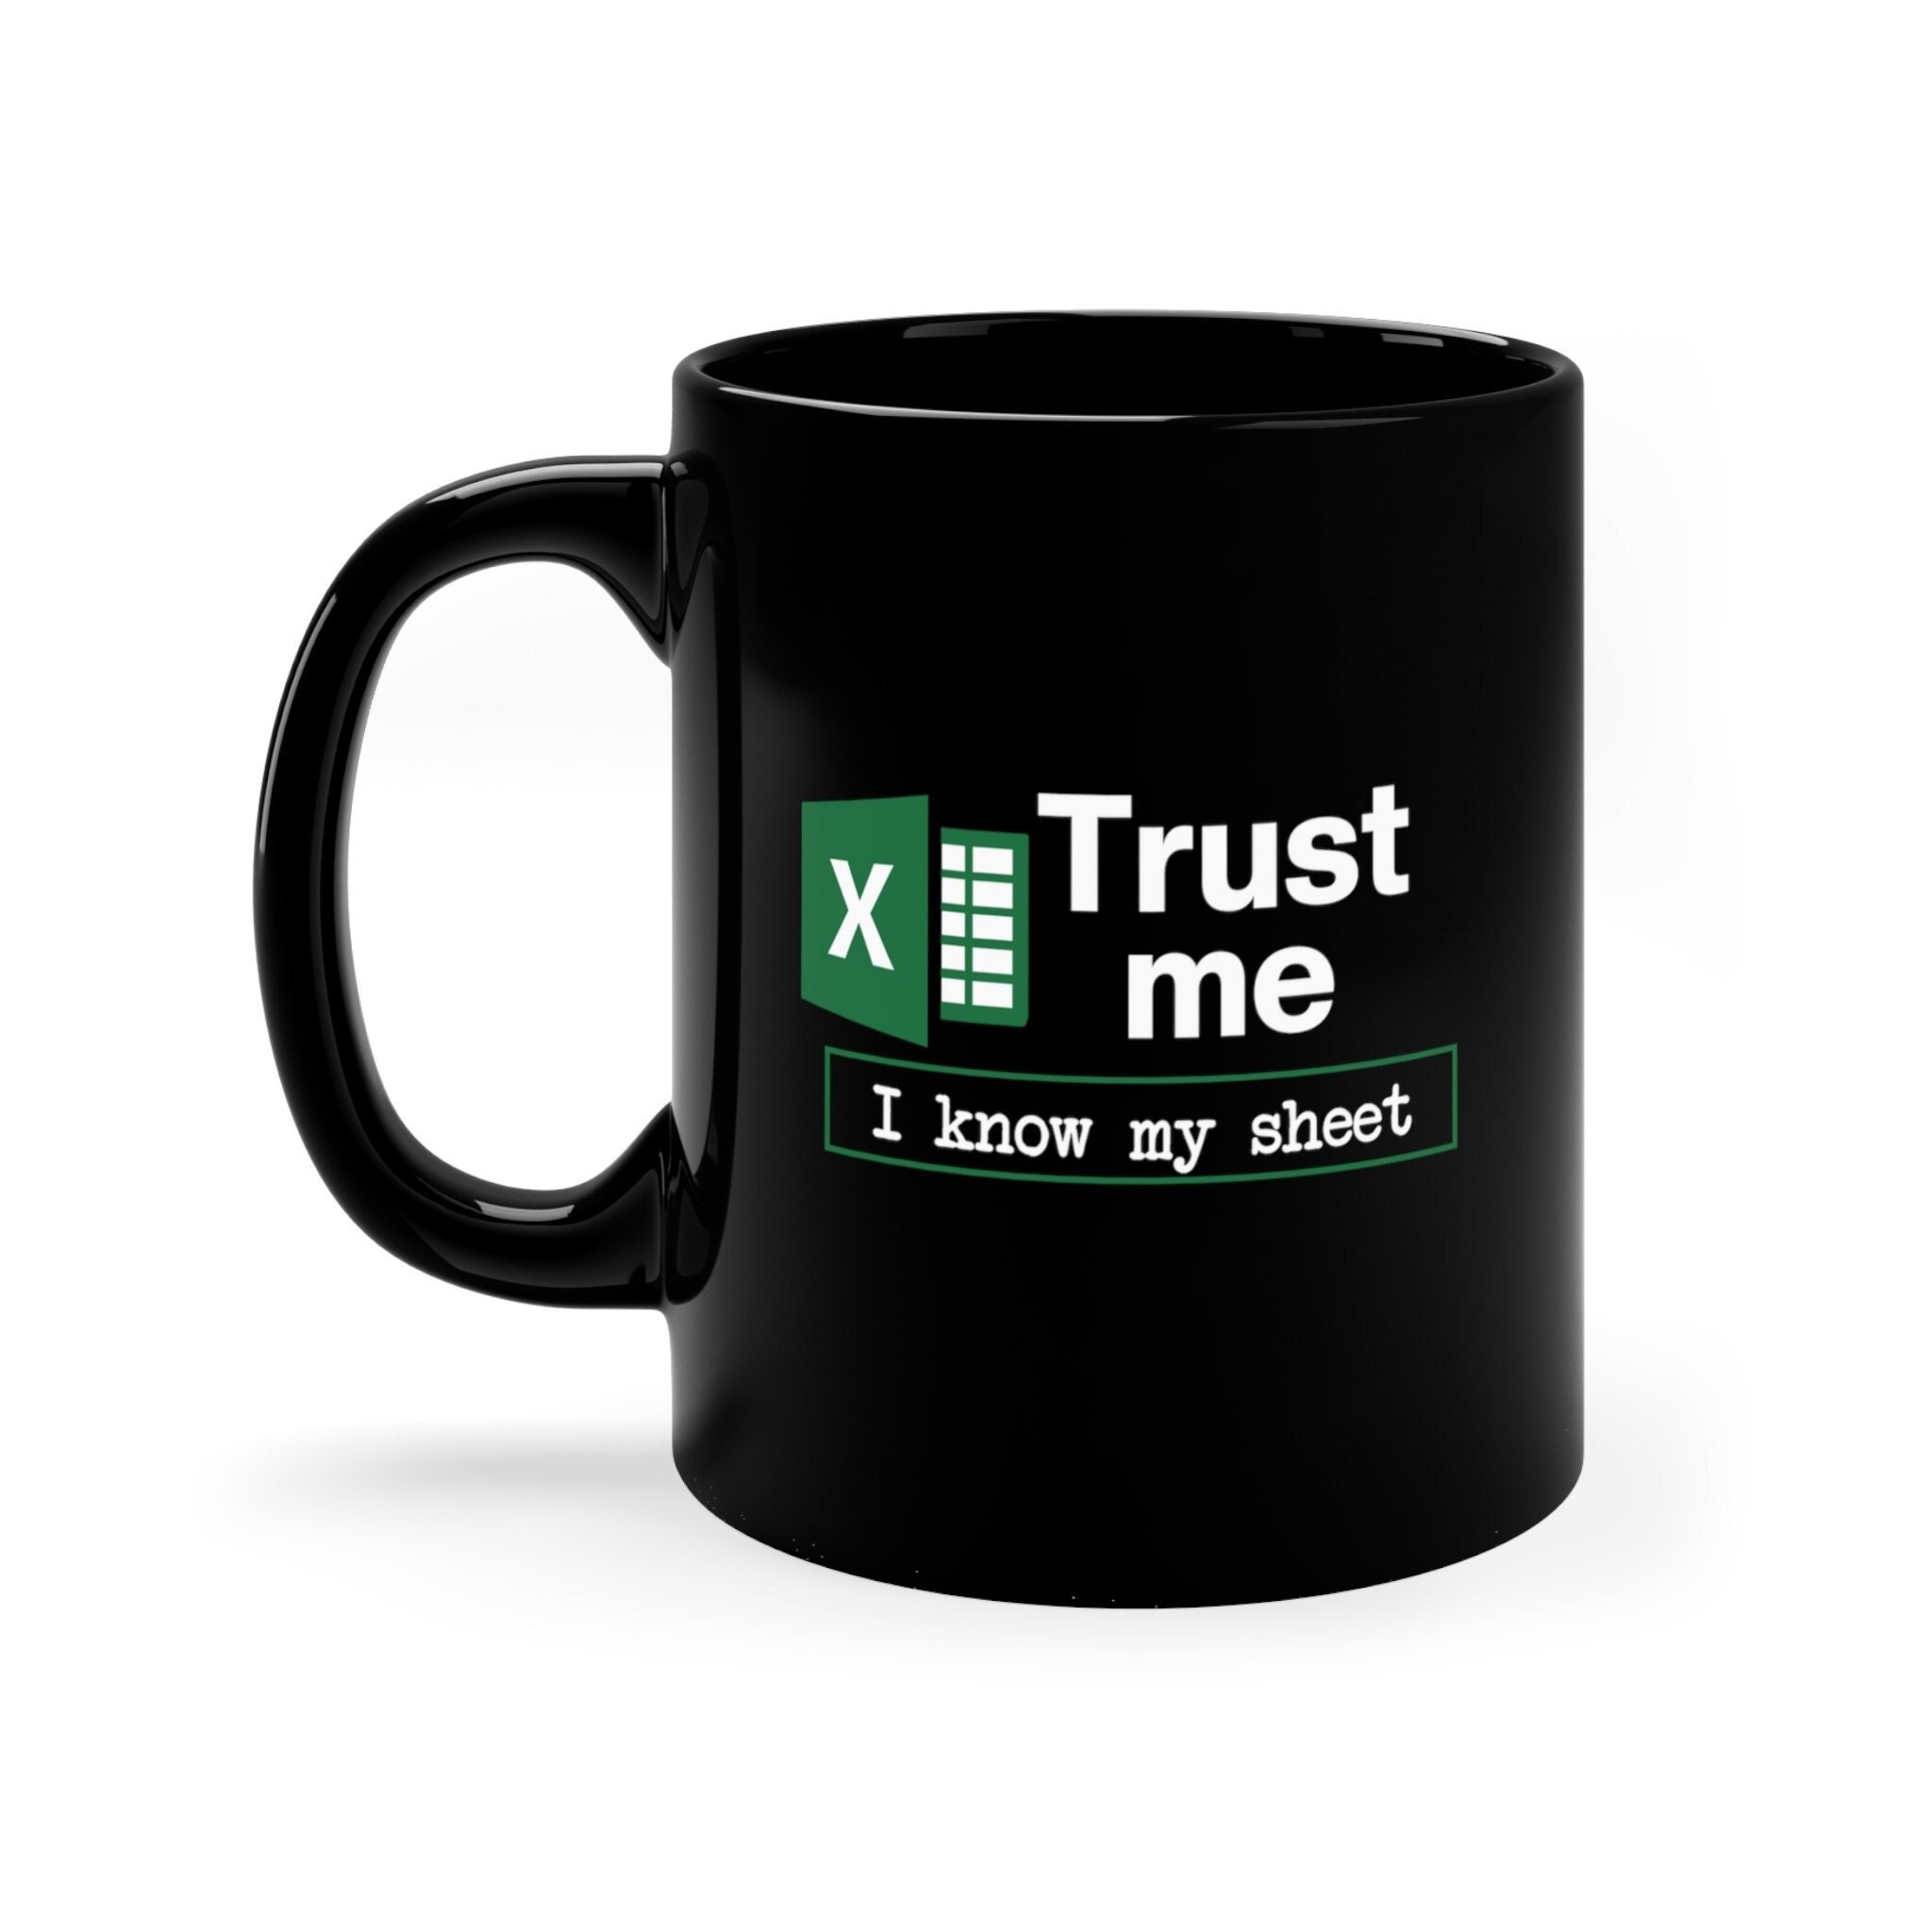 Freak In The Sheets Mug Funny Gifts For Women Men Spreadsheet Excel Mug  Gifts For Boss Cpa Friend Coworkers Accountant 11 15oz - Mug